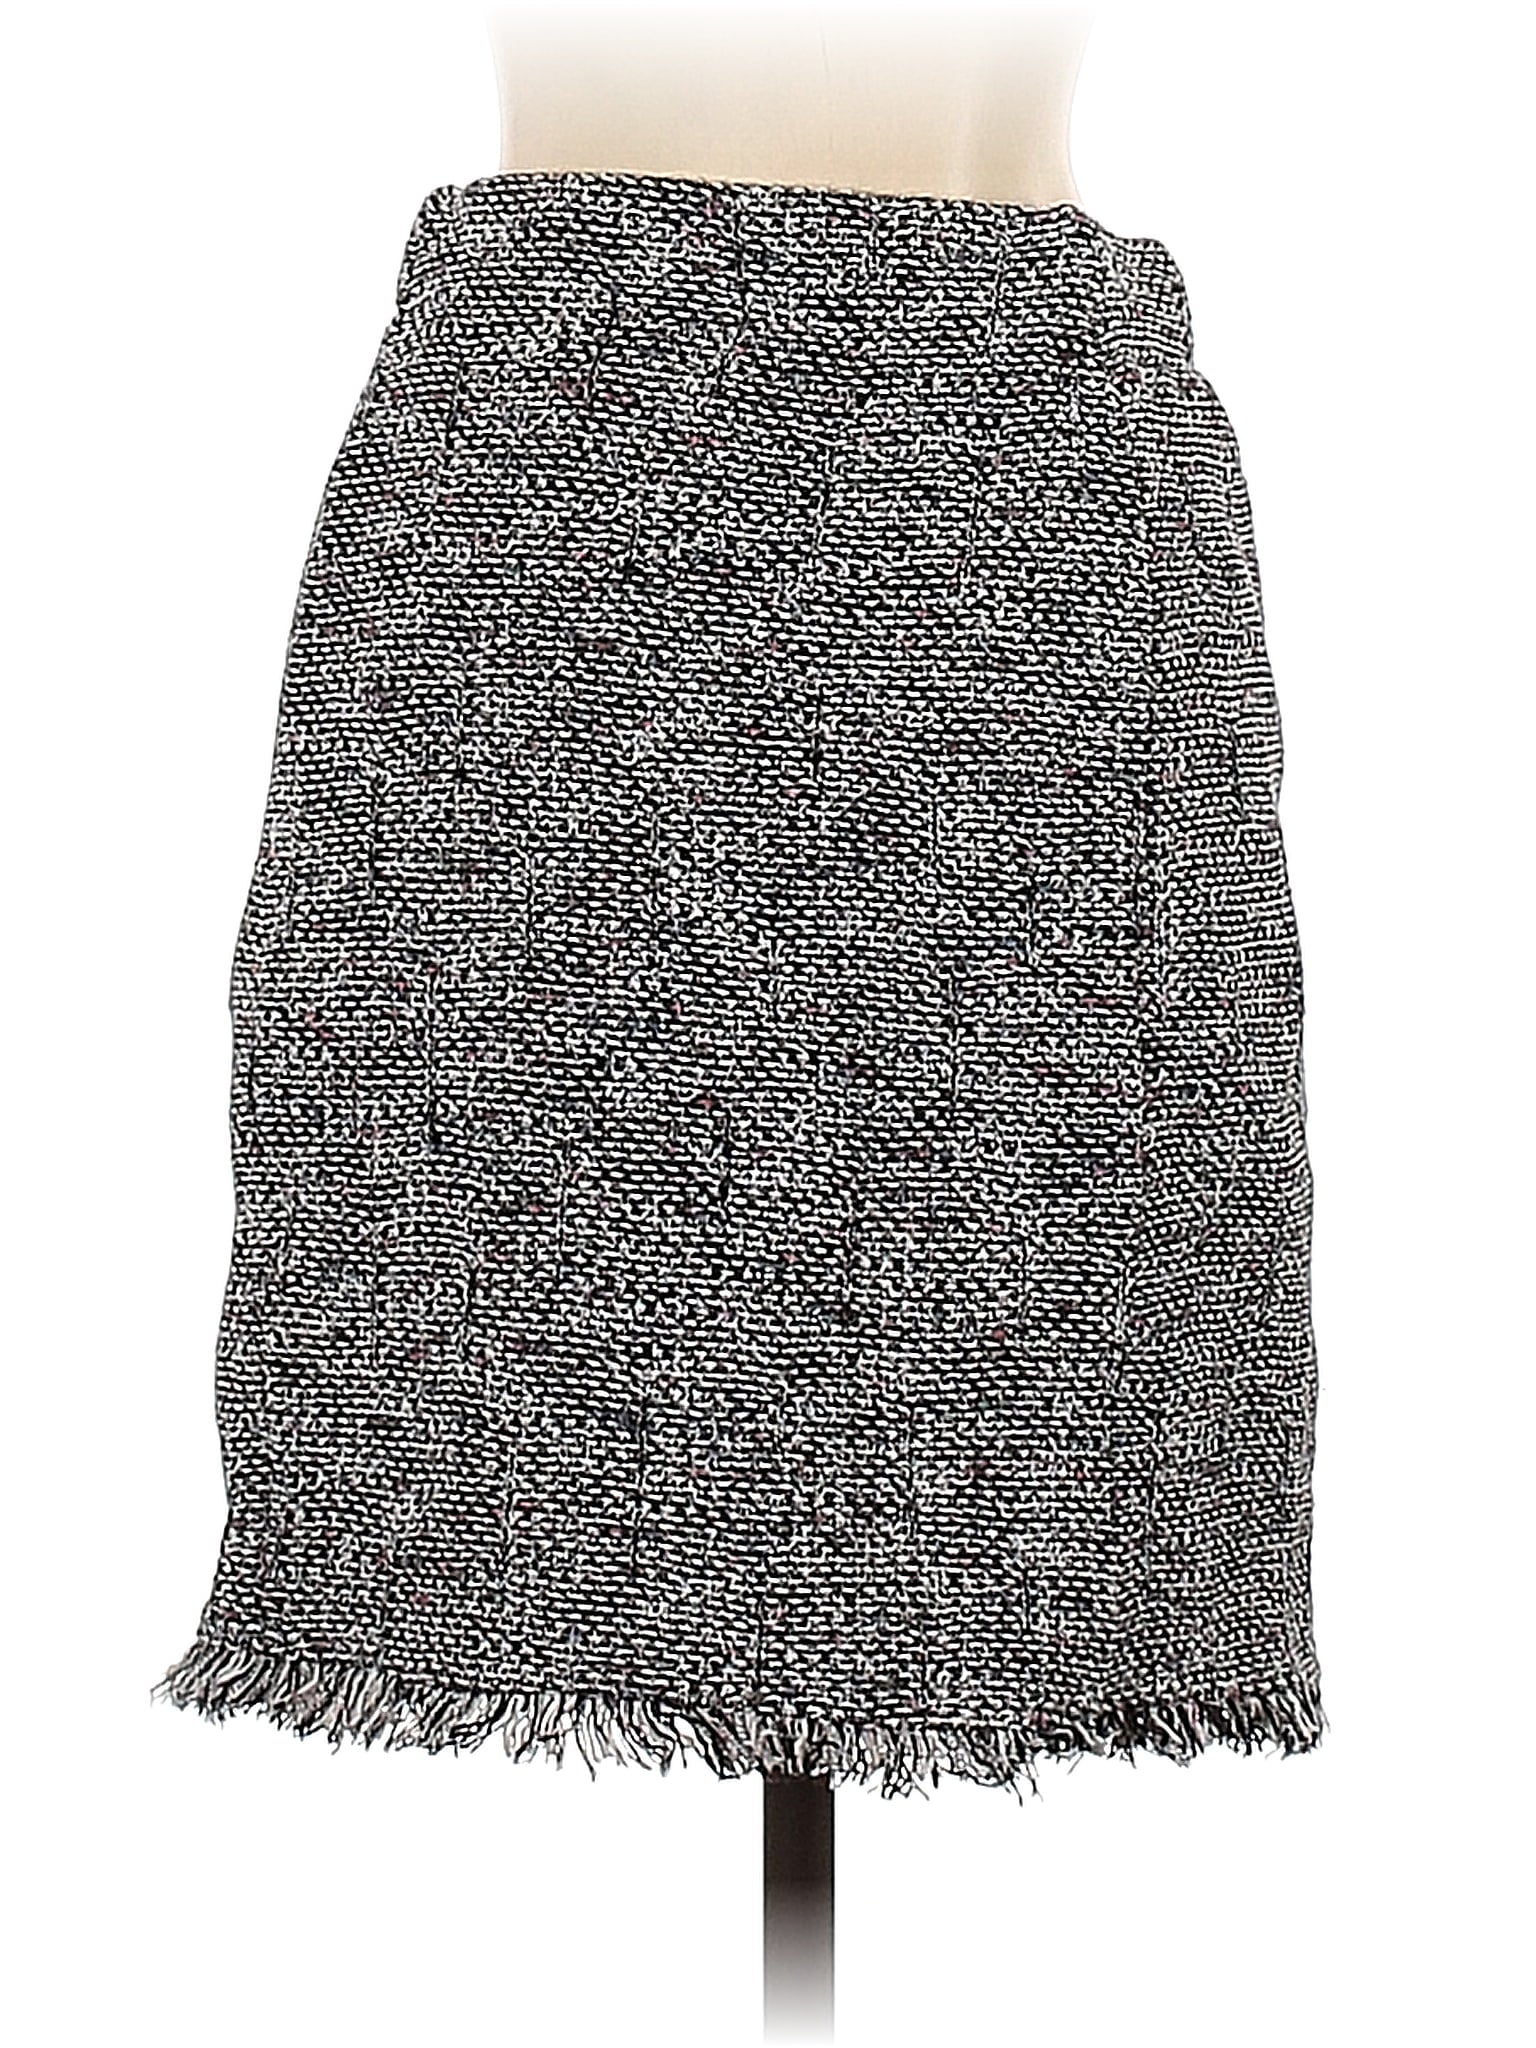 Casual Skirt size - P